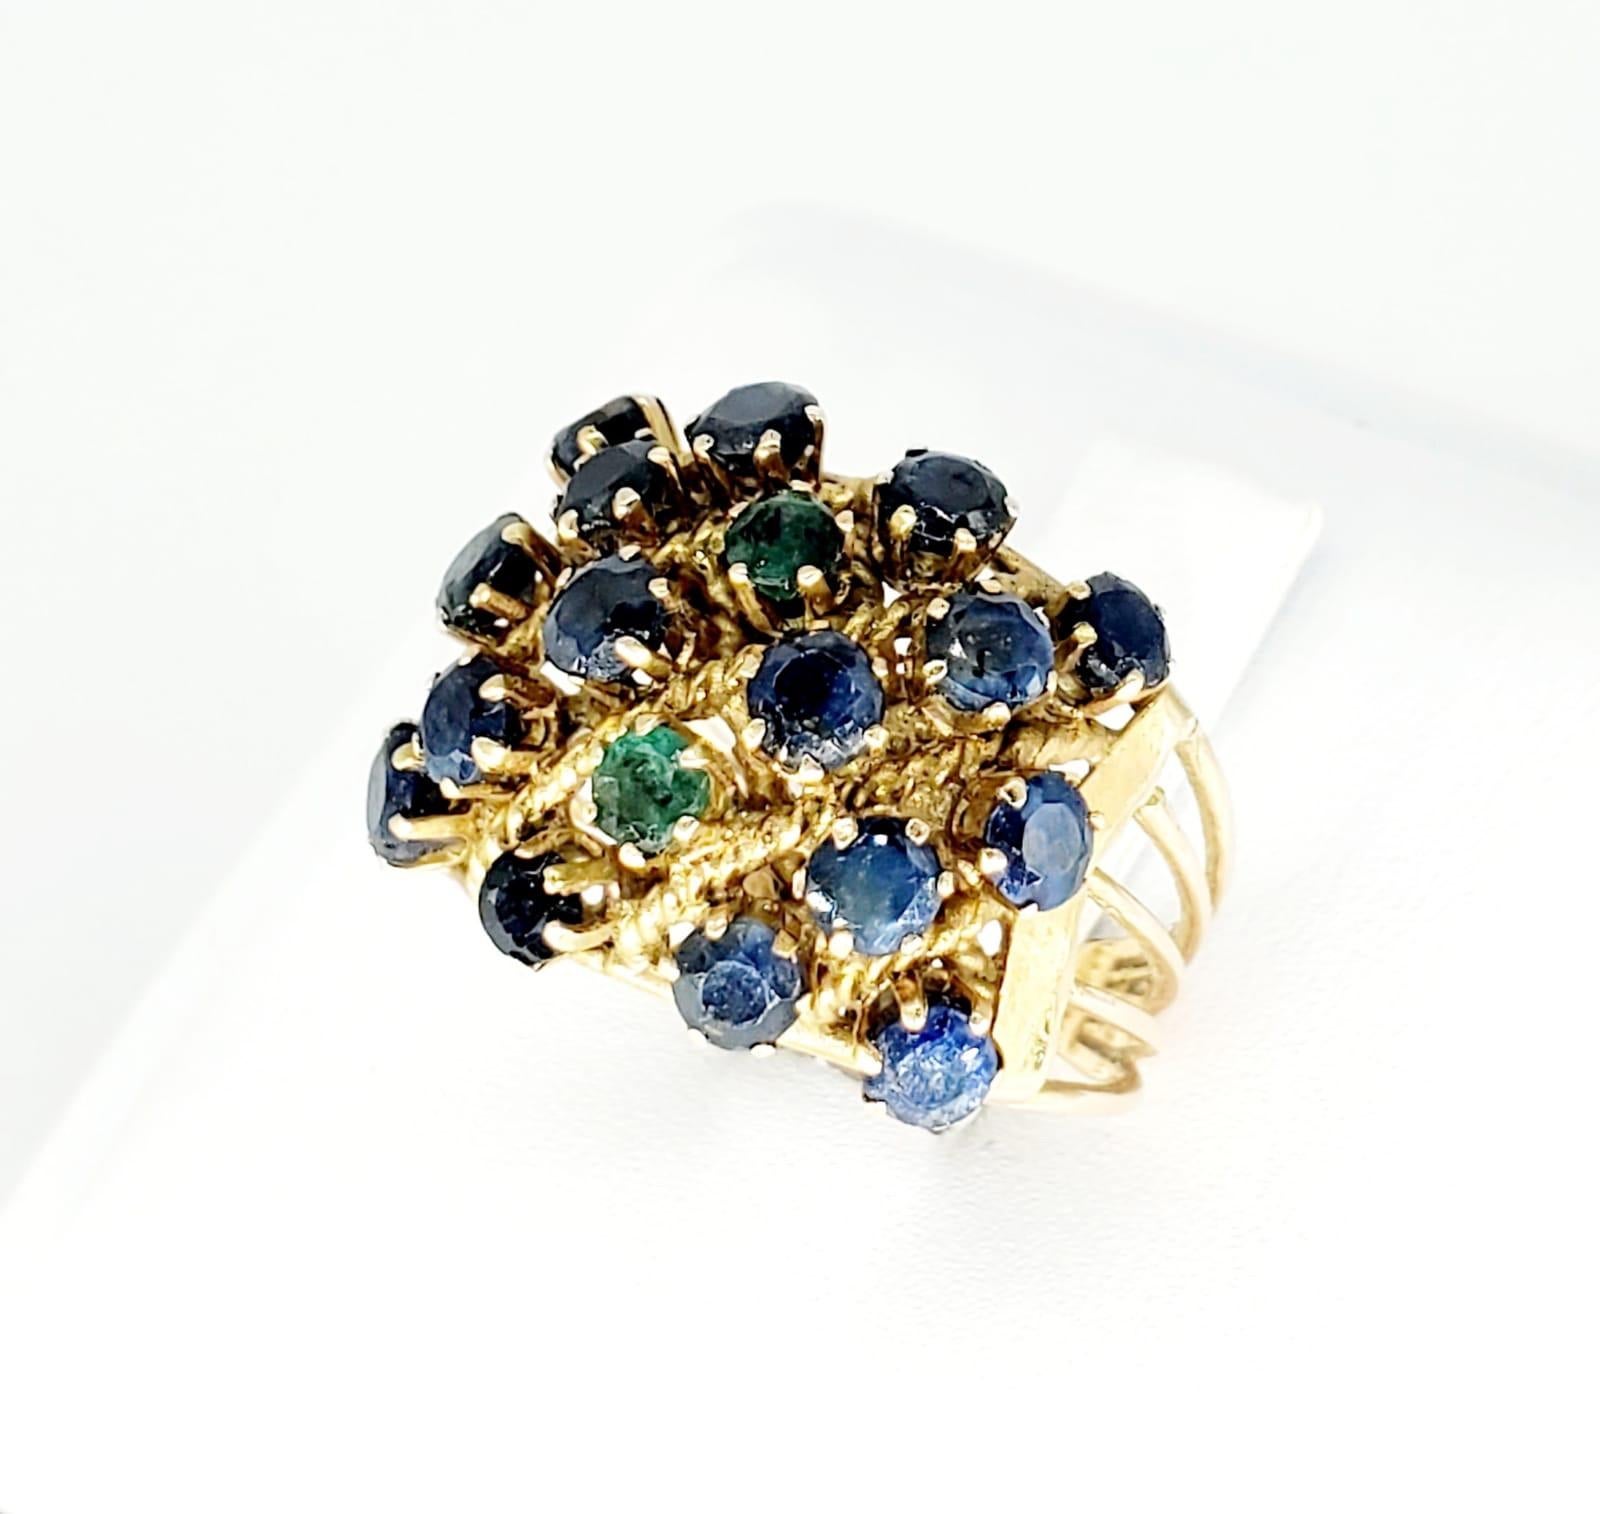 Retro 4 Carat Sapphires & emeralds Rose cut stones Cluster Cocktail Gold Ring. Each sapphire is measured 3.8mm in size which total approx 4 carat in total weight. Beautiful rope design across and in between the sapphires making it look spiral. The